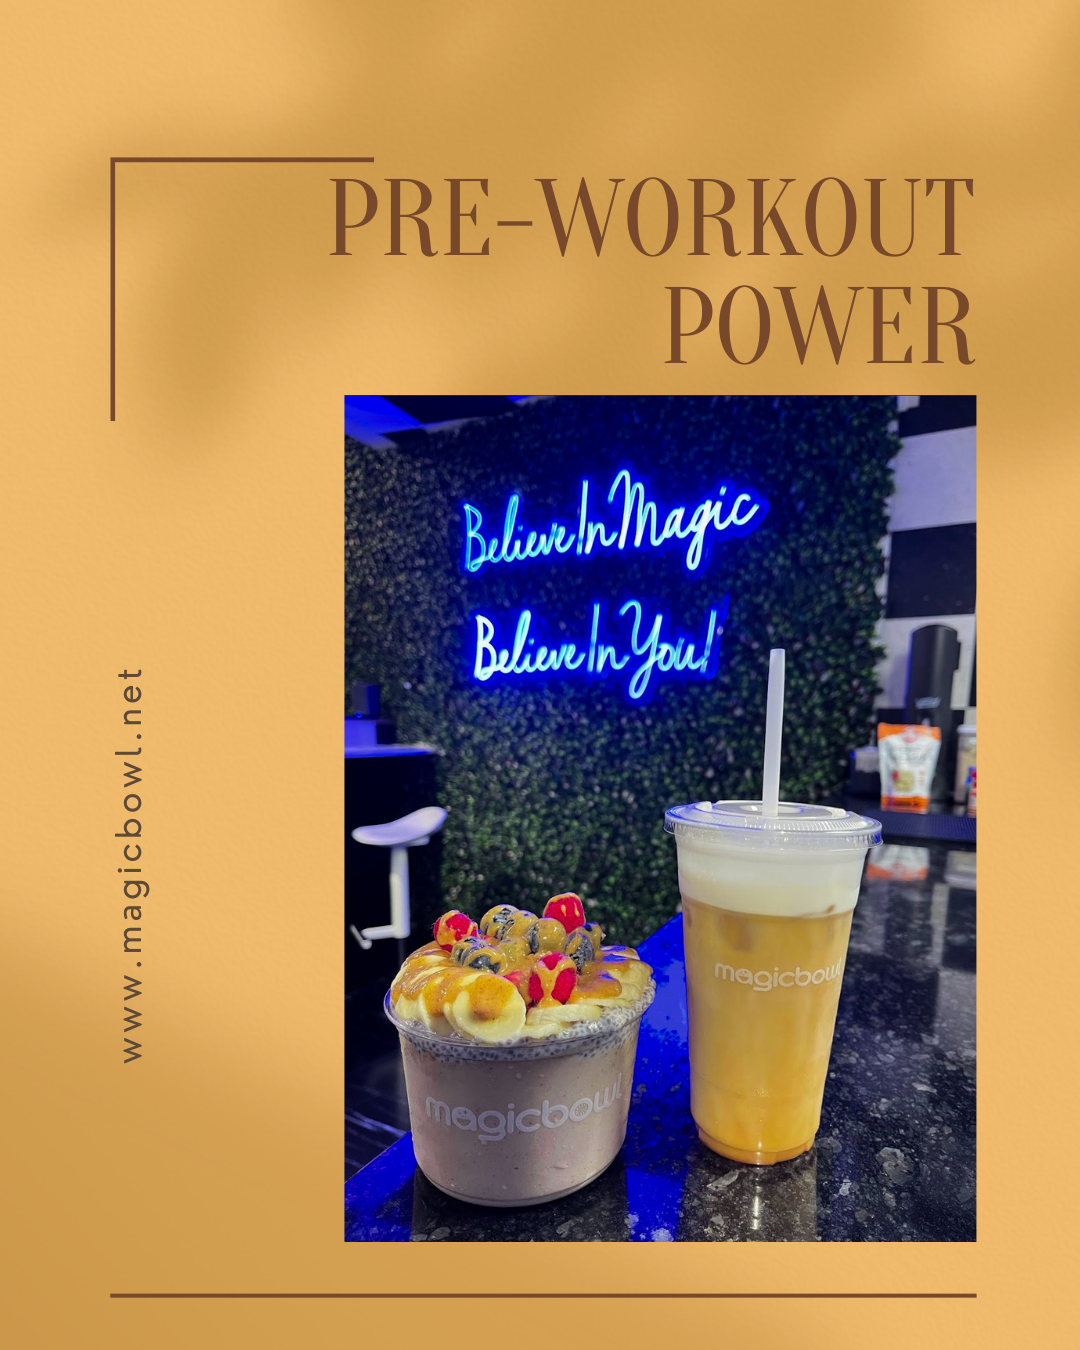 You are currently viewing Acai Bowls and Smoothies as Pre-Workout Powerhouses